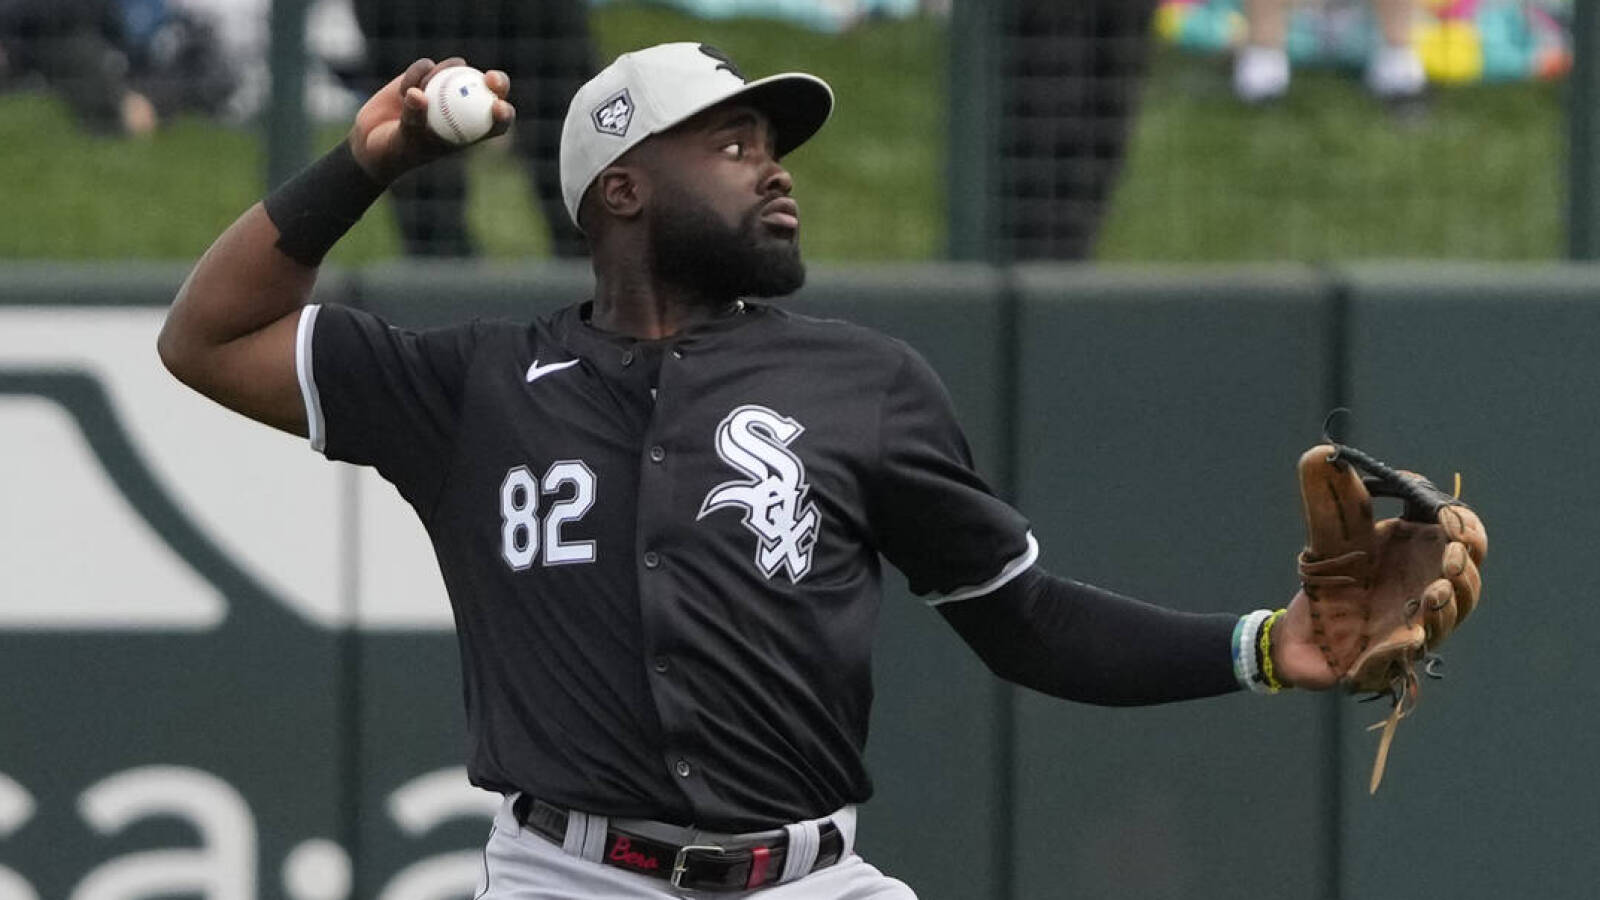 White Sox to promote prospect from Double-A for MLB debut